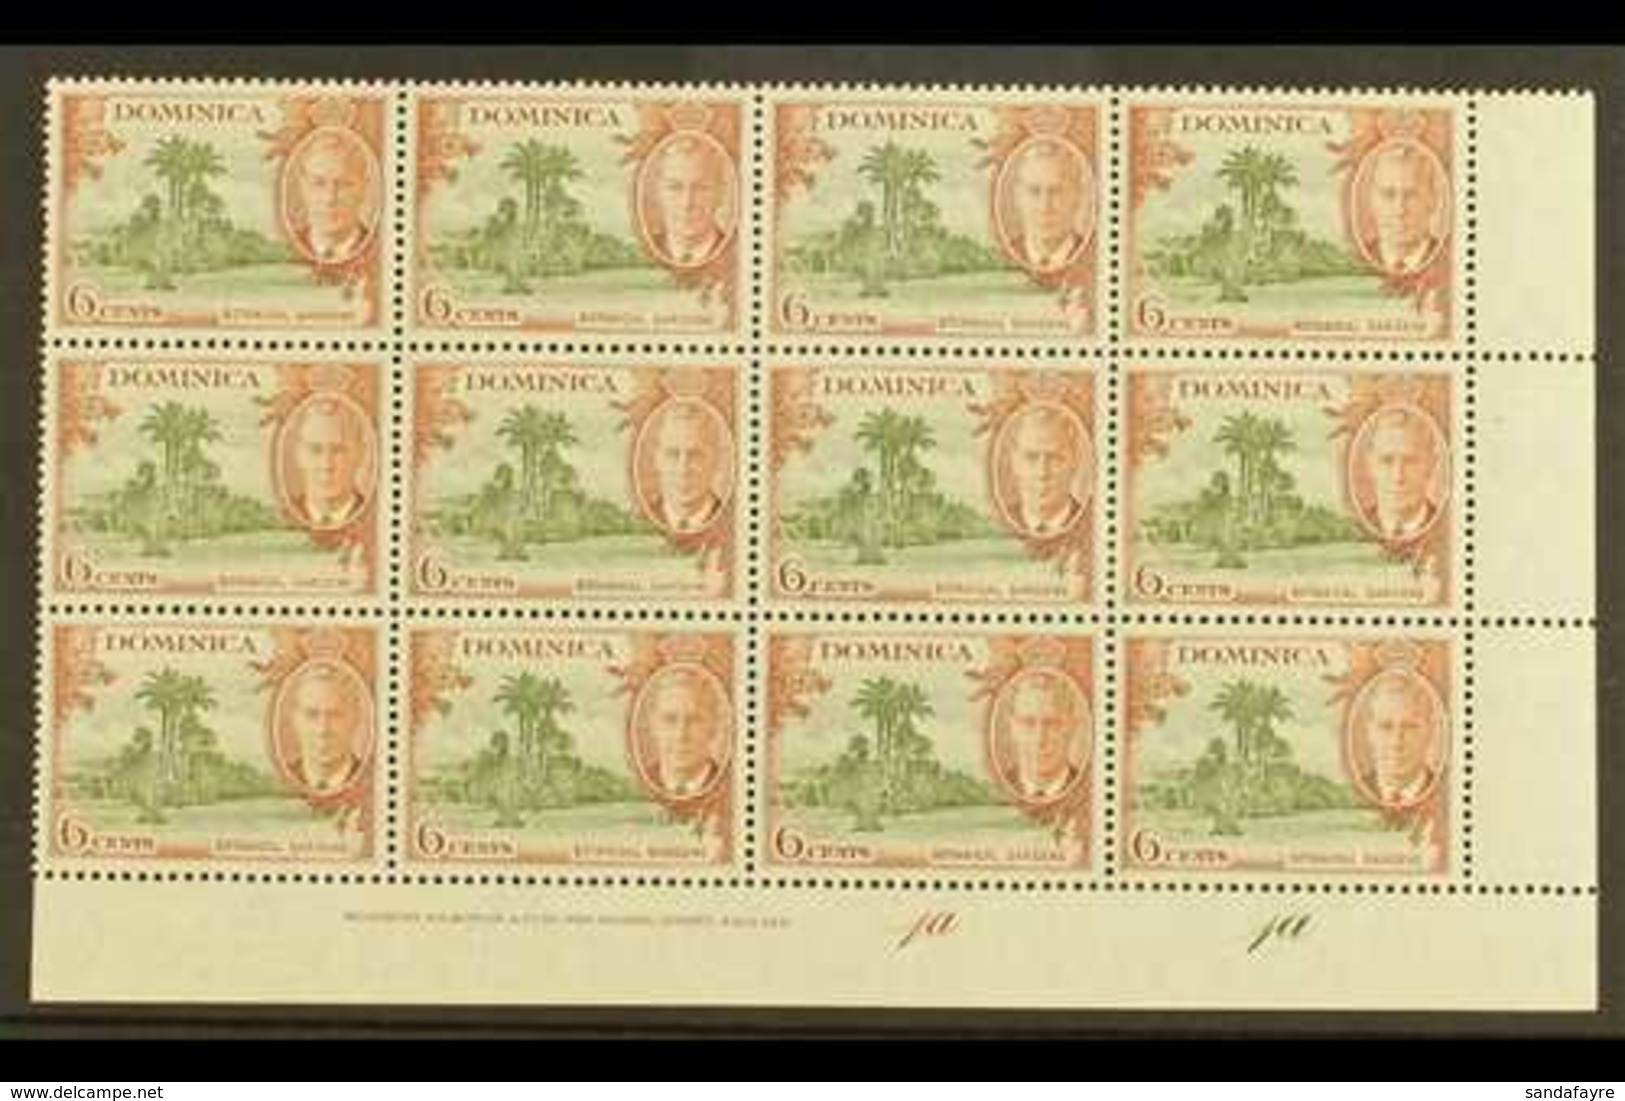 1951 6c Olive & Chestnut "A" OF "CA" MISSING FROM WATERMARK Variety (SG 126b, MP 22b) Within Superb Never Hinged Mint Lo - Dominique (...-1978)